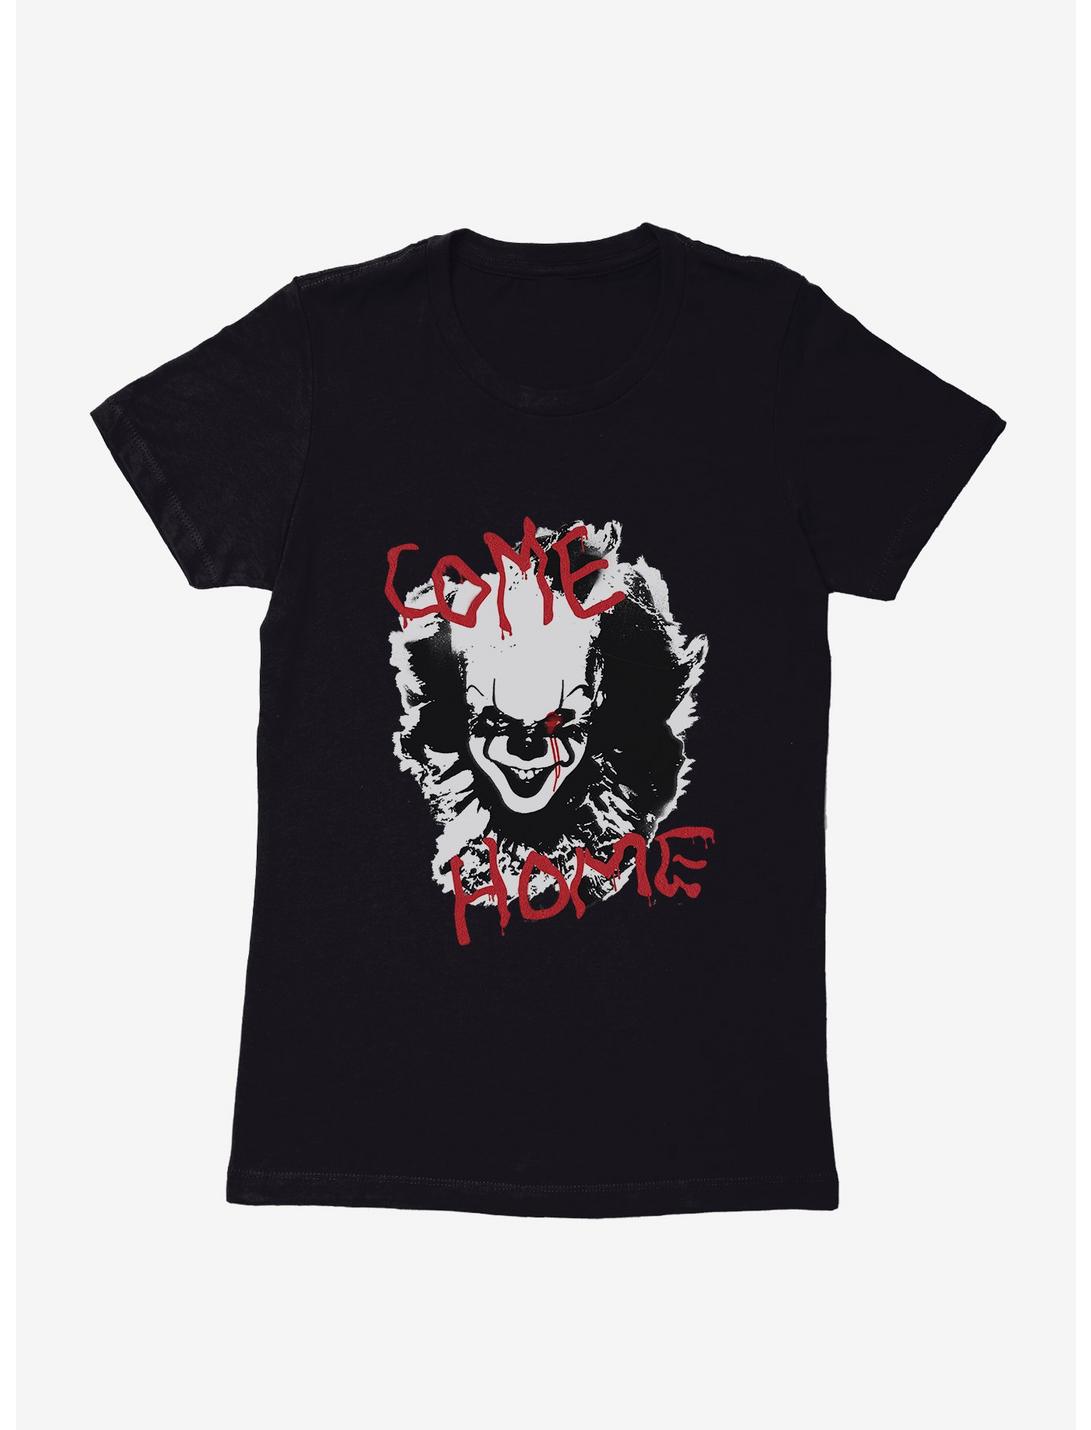 IT Chapter Two Come Home Cutout Womens T-Shirt, BLACK, hi-res